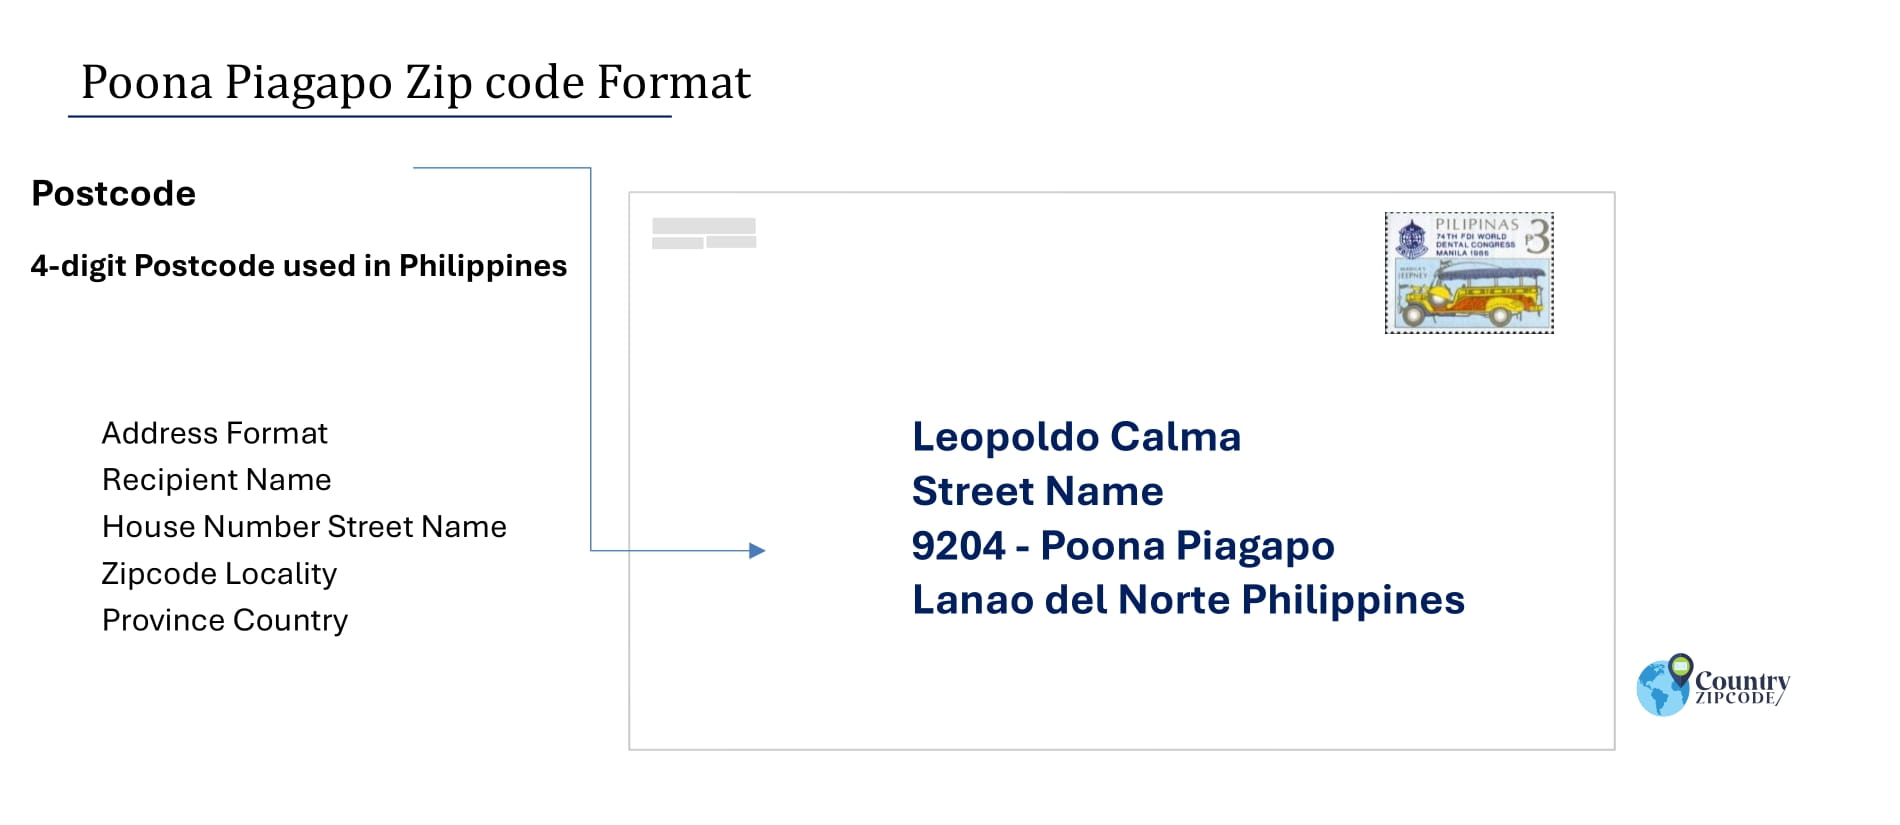 example of Poona Piagapo Philippines zip code and address format